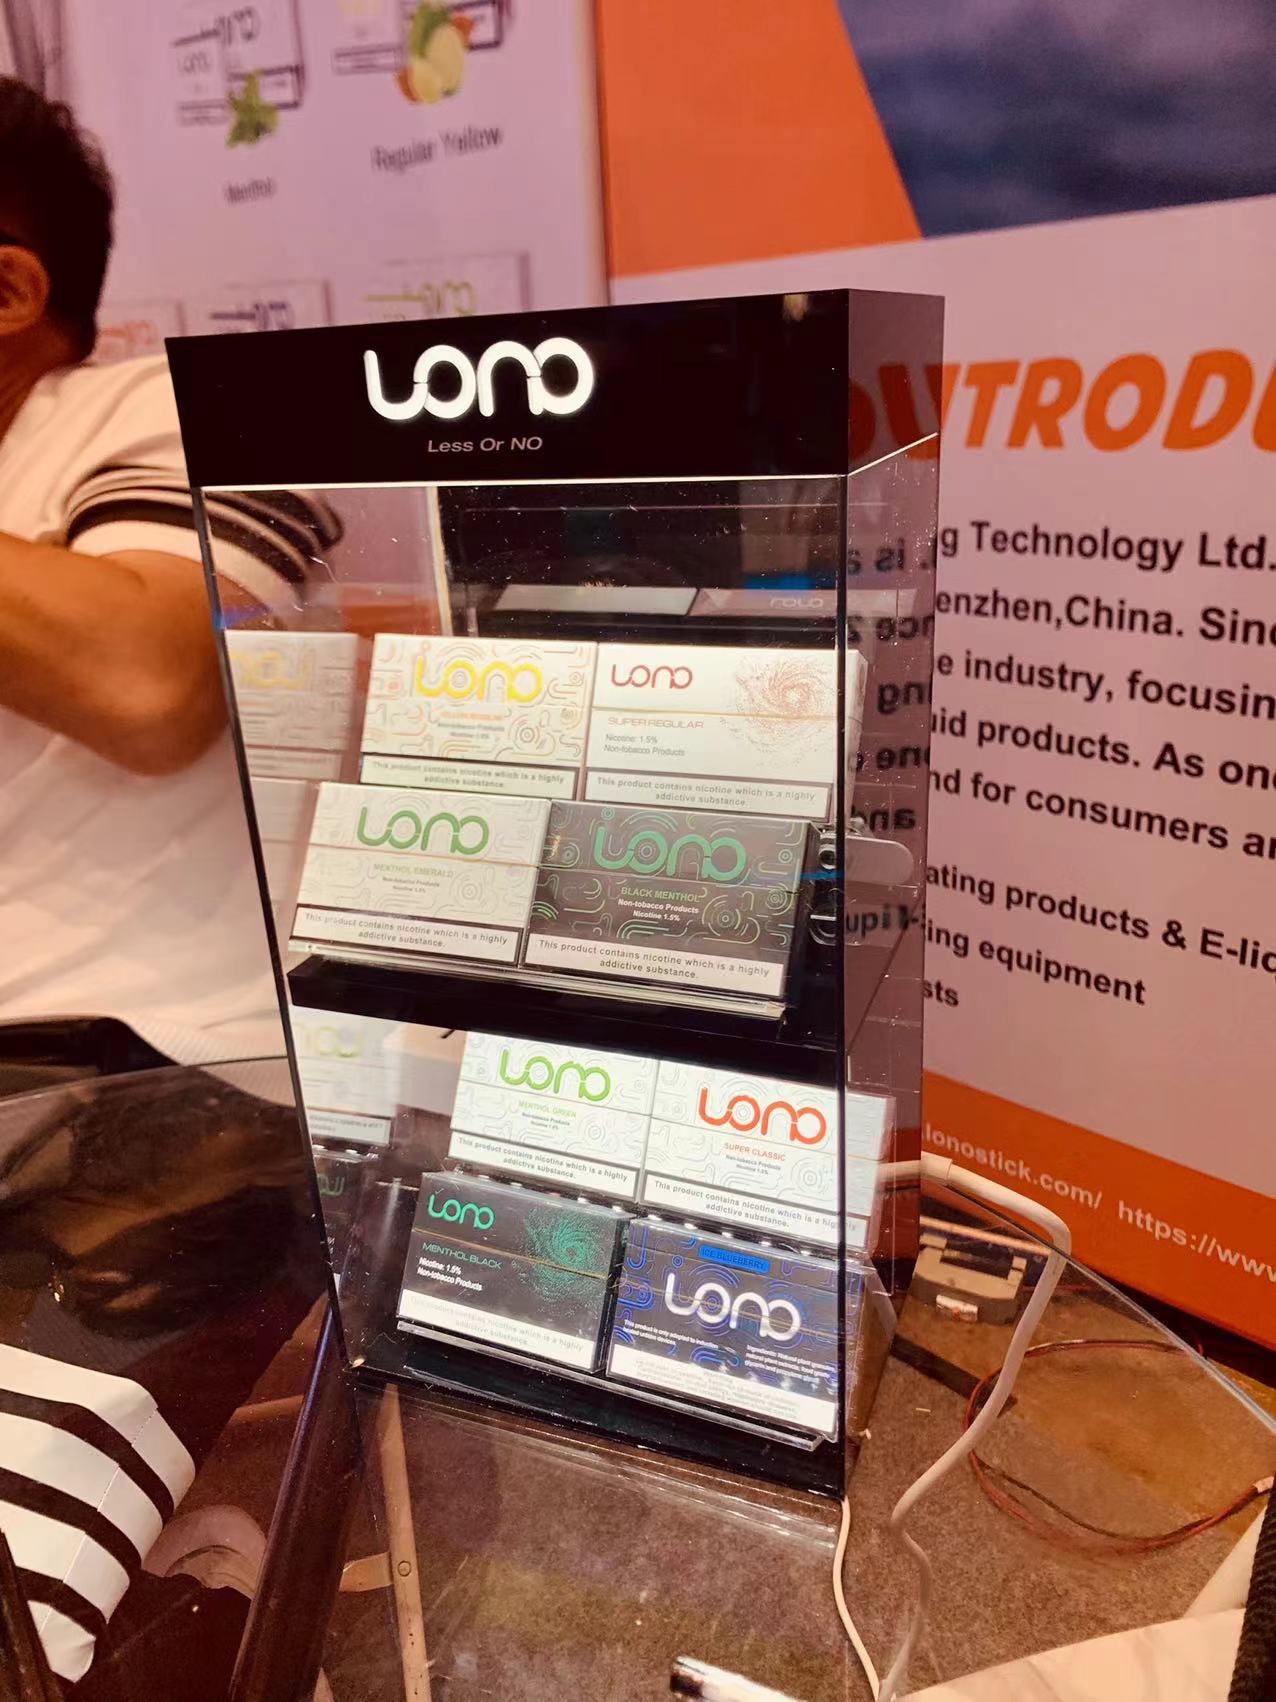 LONO Stick on X: Our exhibition in Indonesia was successfully